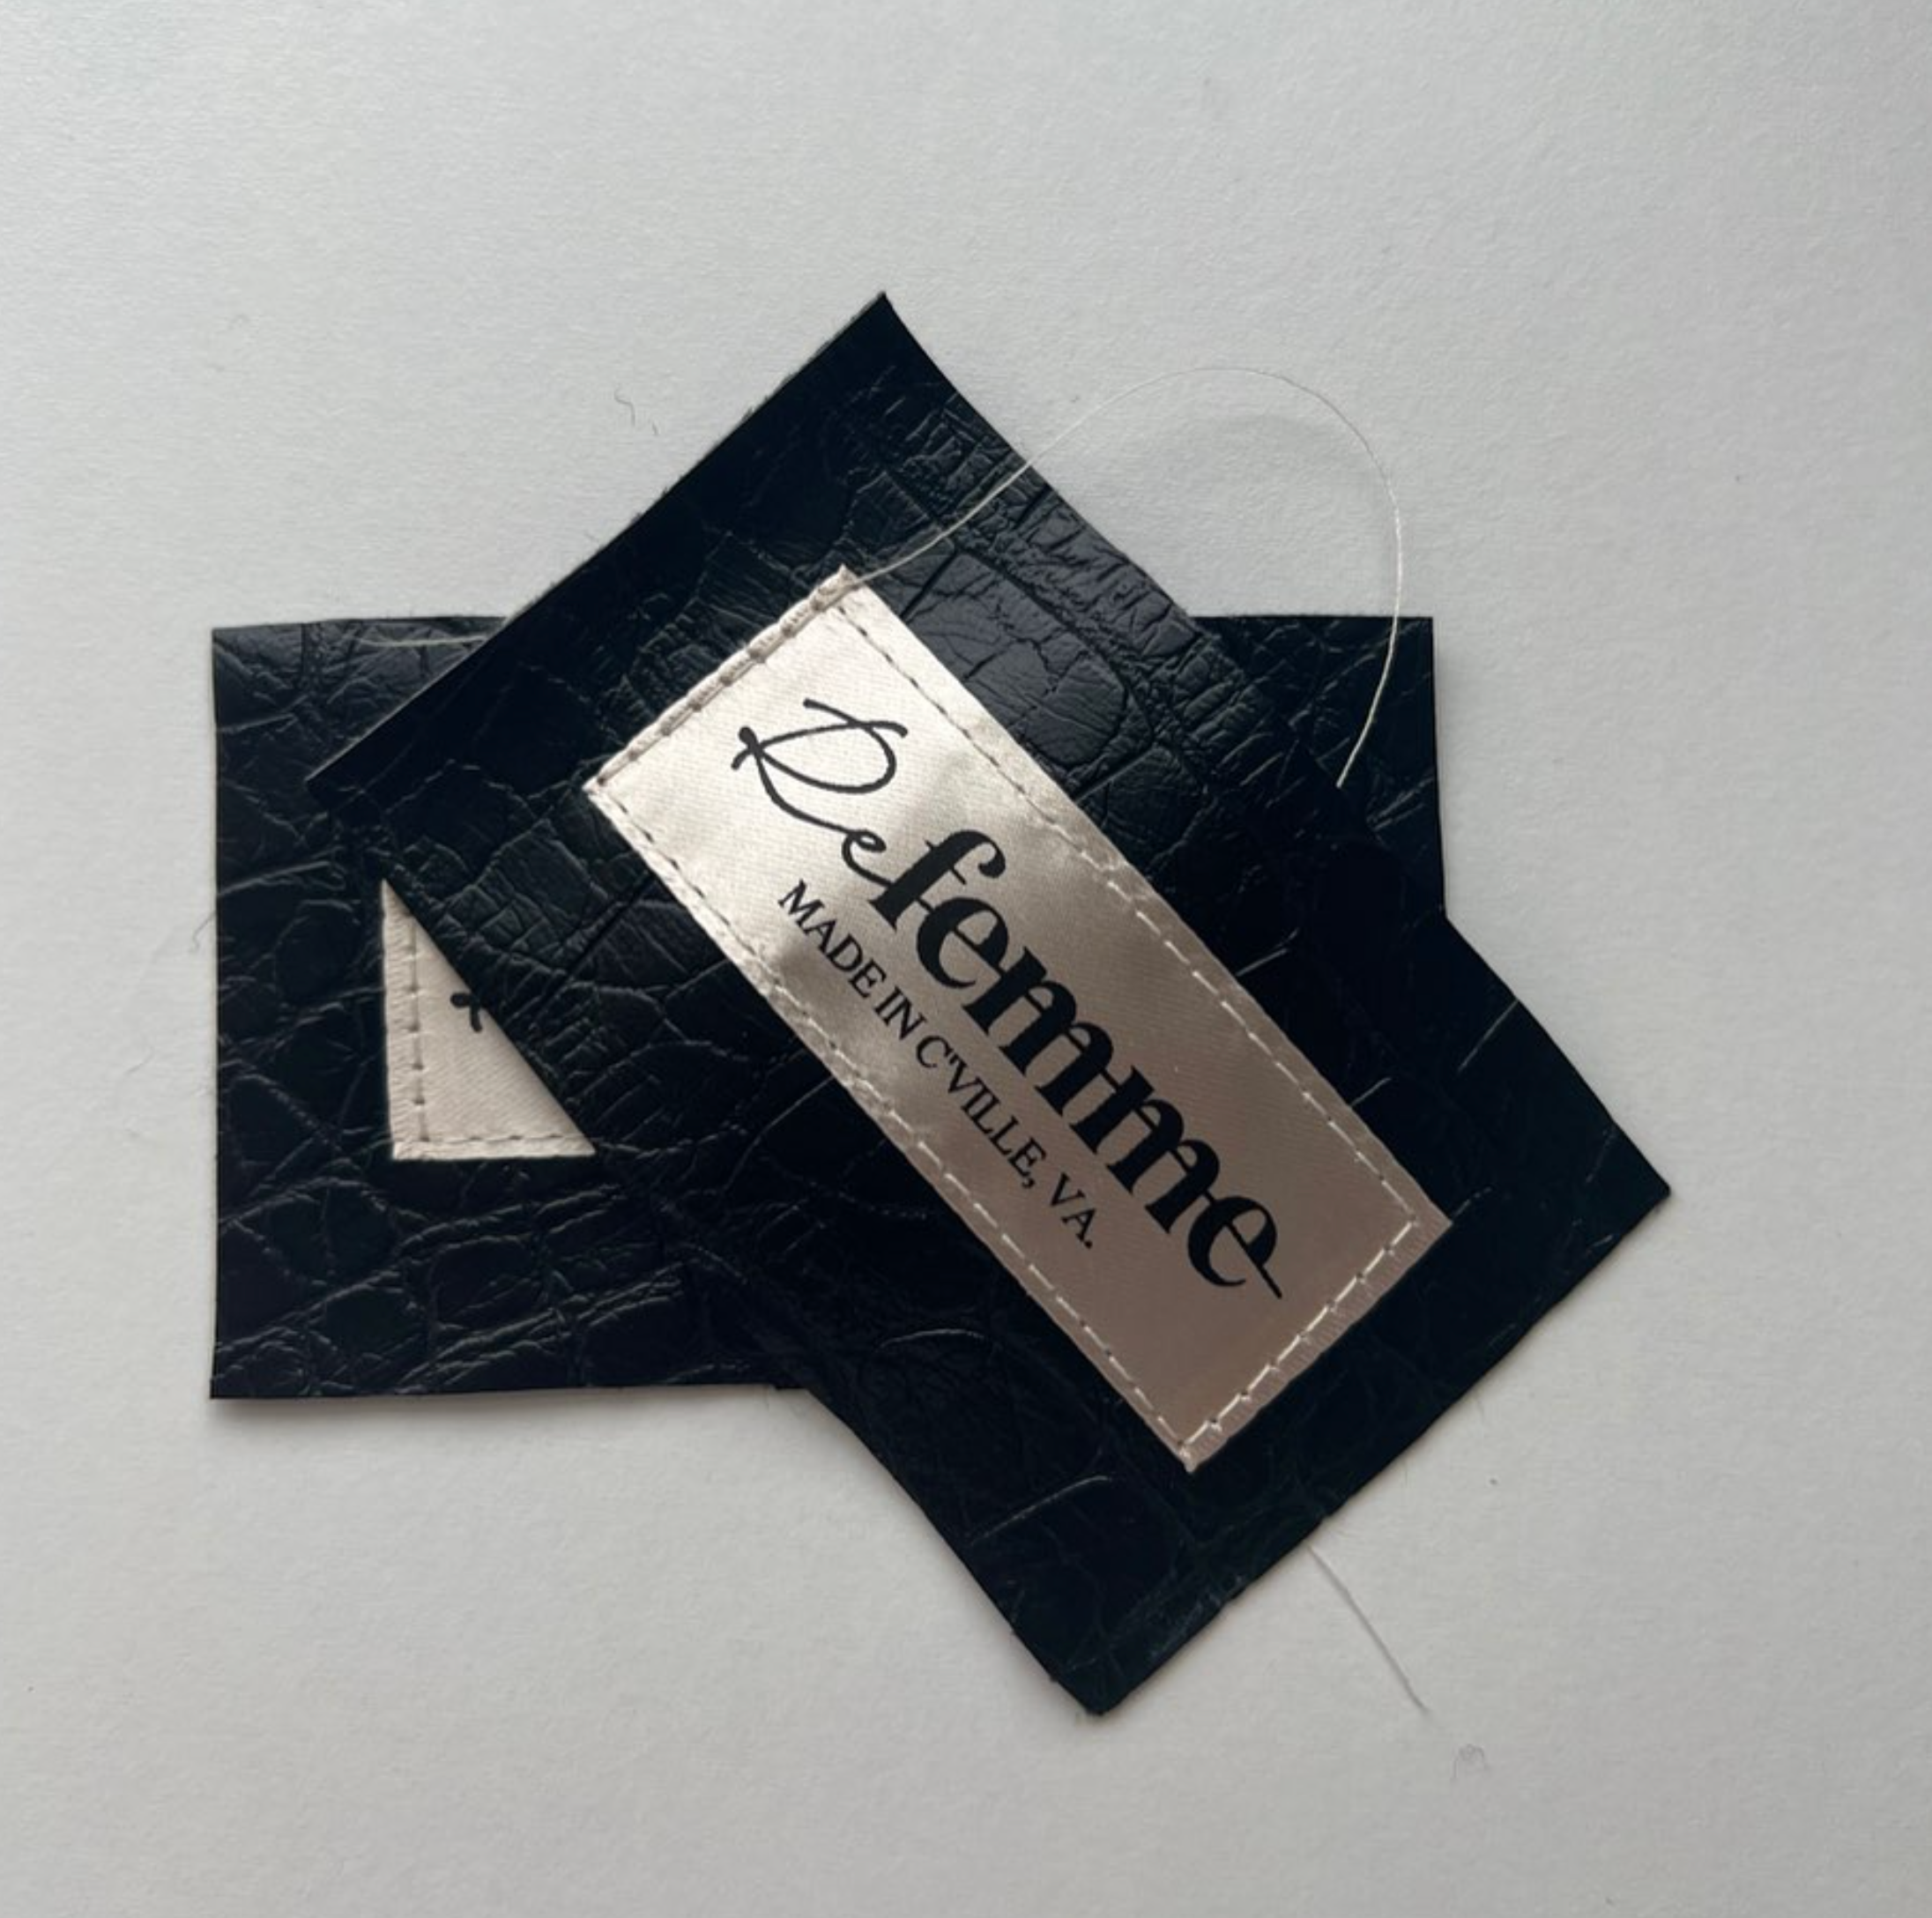 Black Refemme sew-in tags made by Refemme